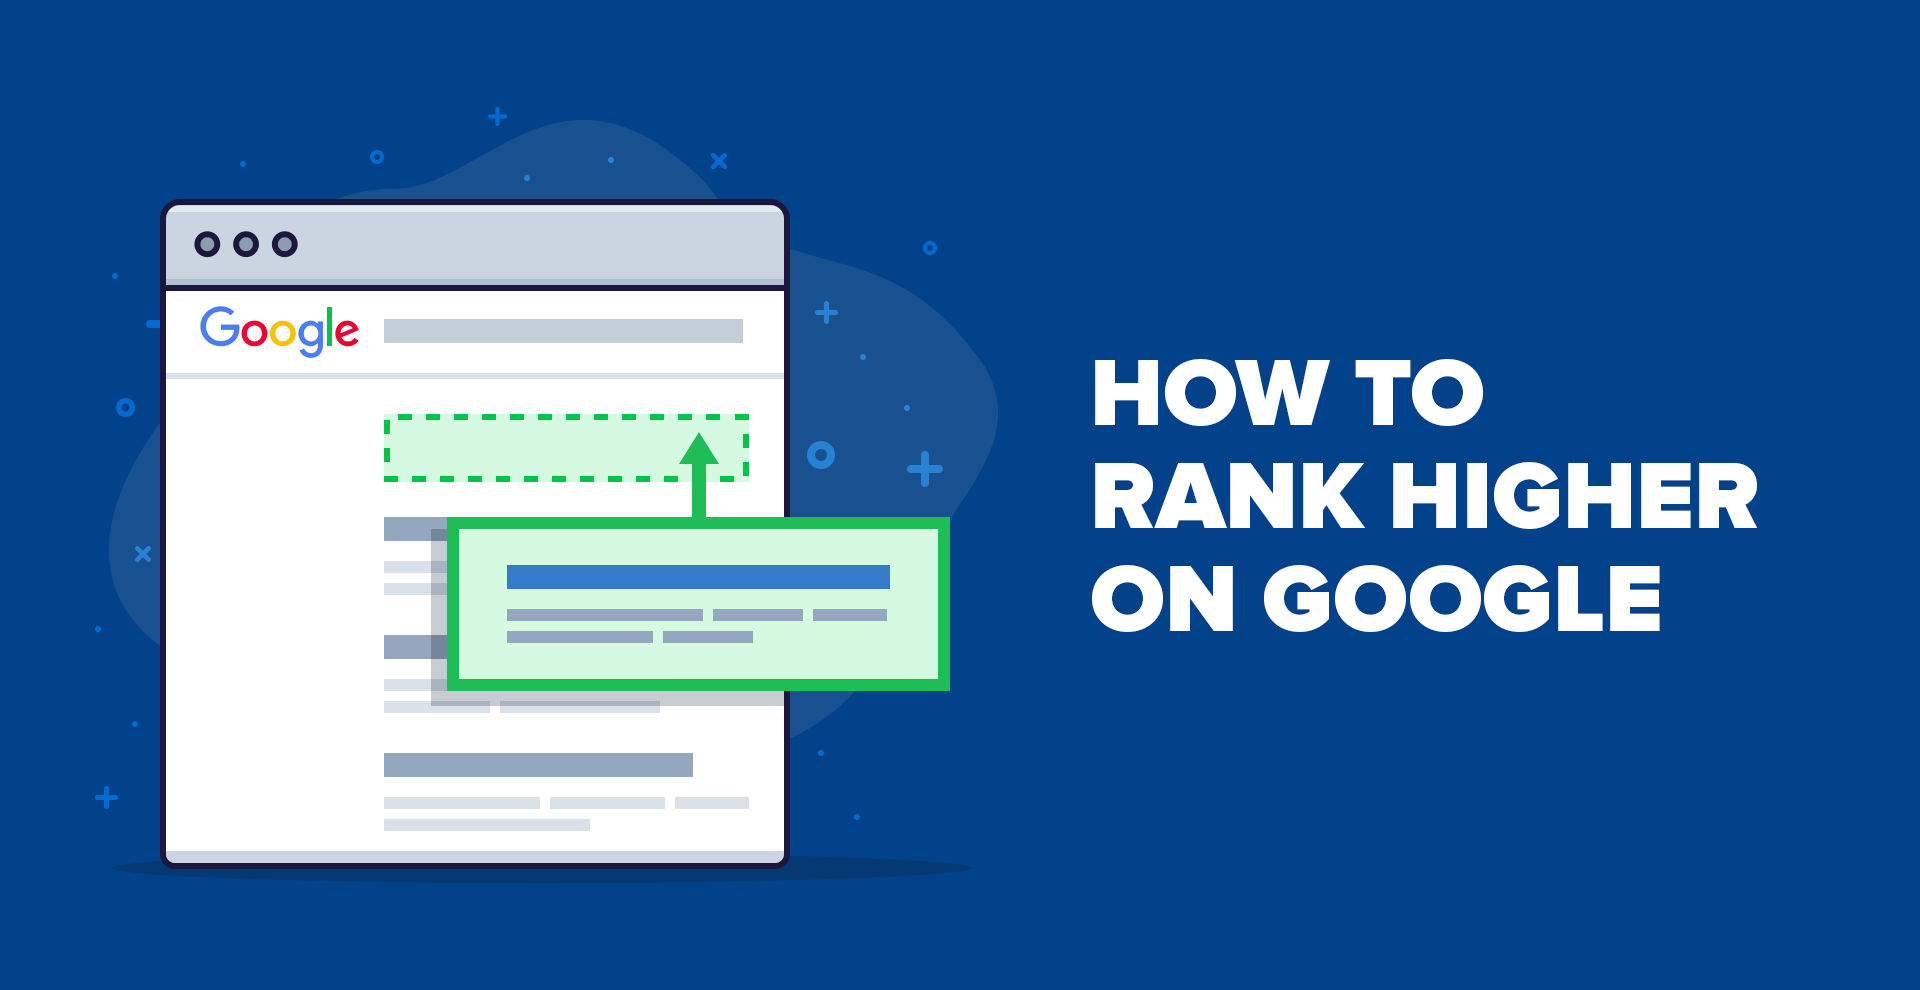 HOW TO RANK YOUR SITE ON GOOGLE?